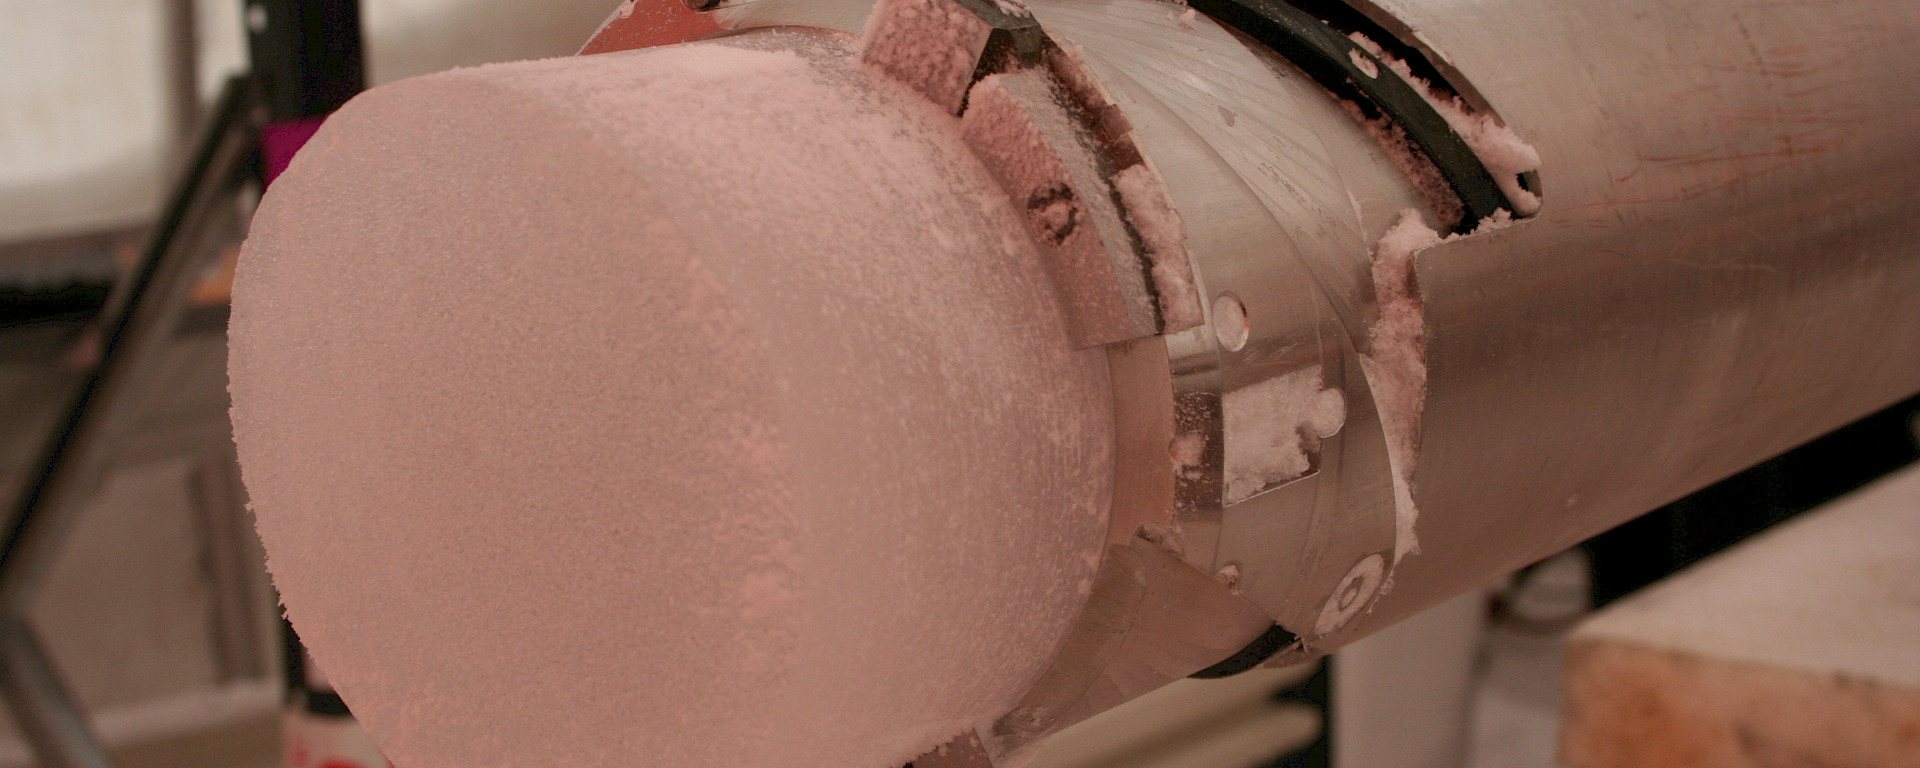 The end of an ice core protruding from the drill.